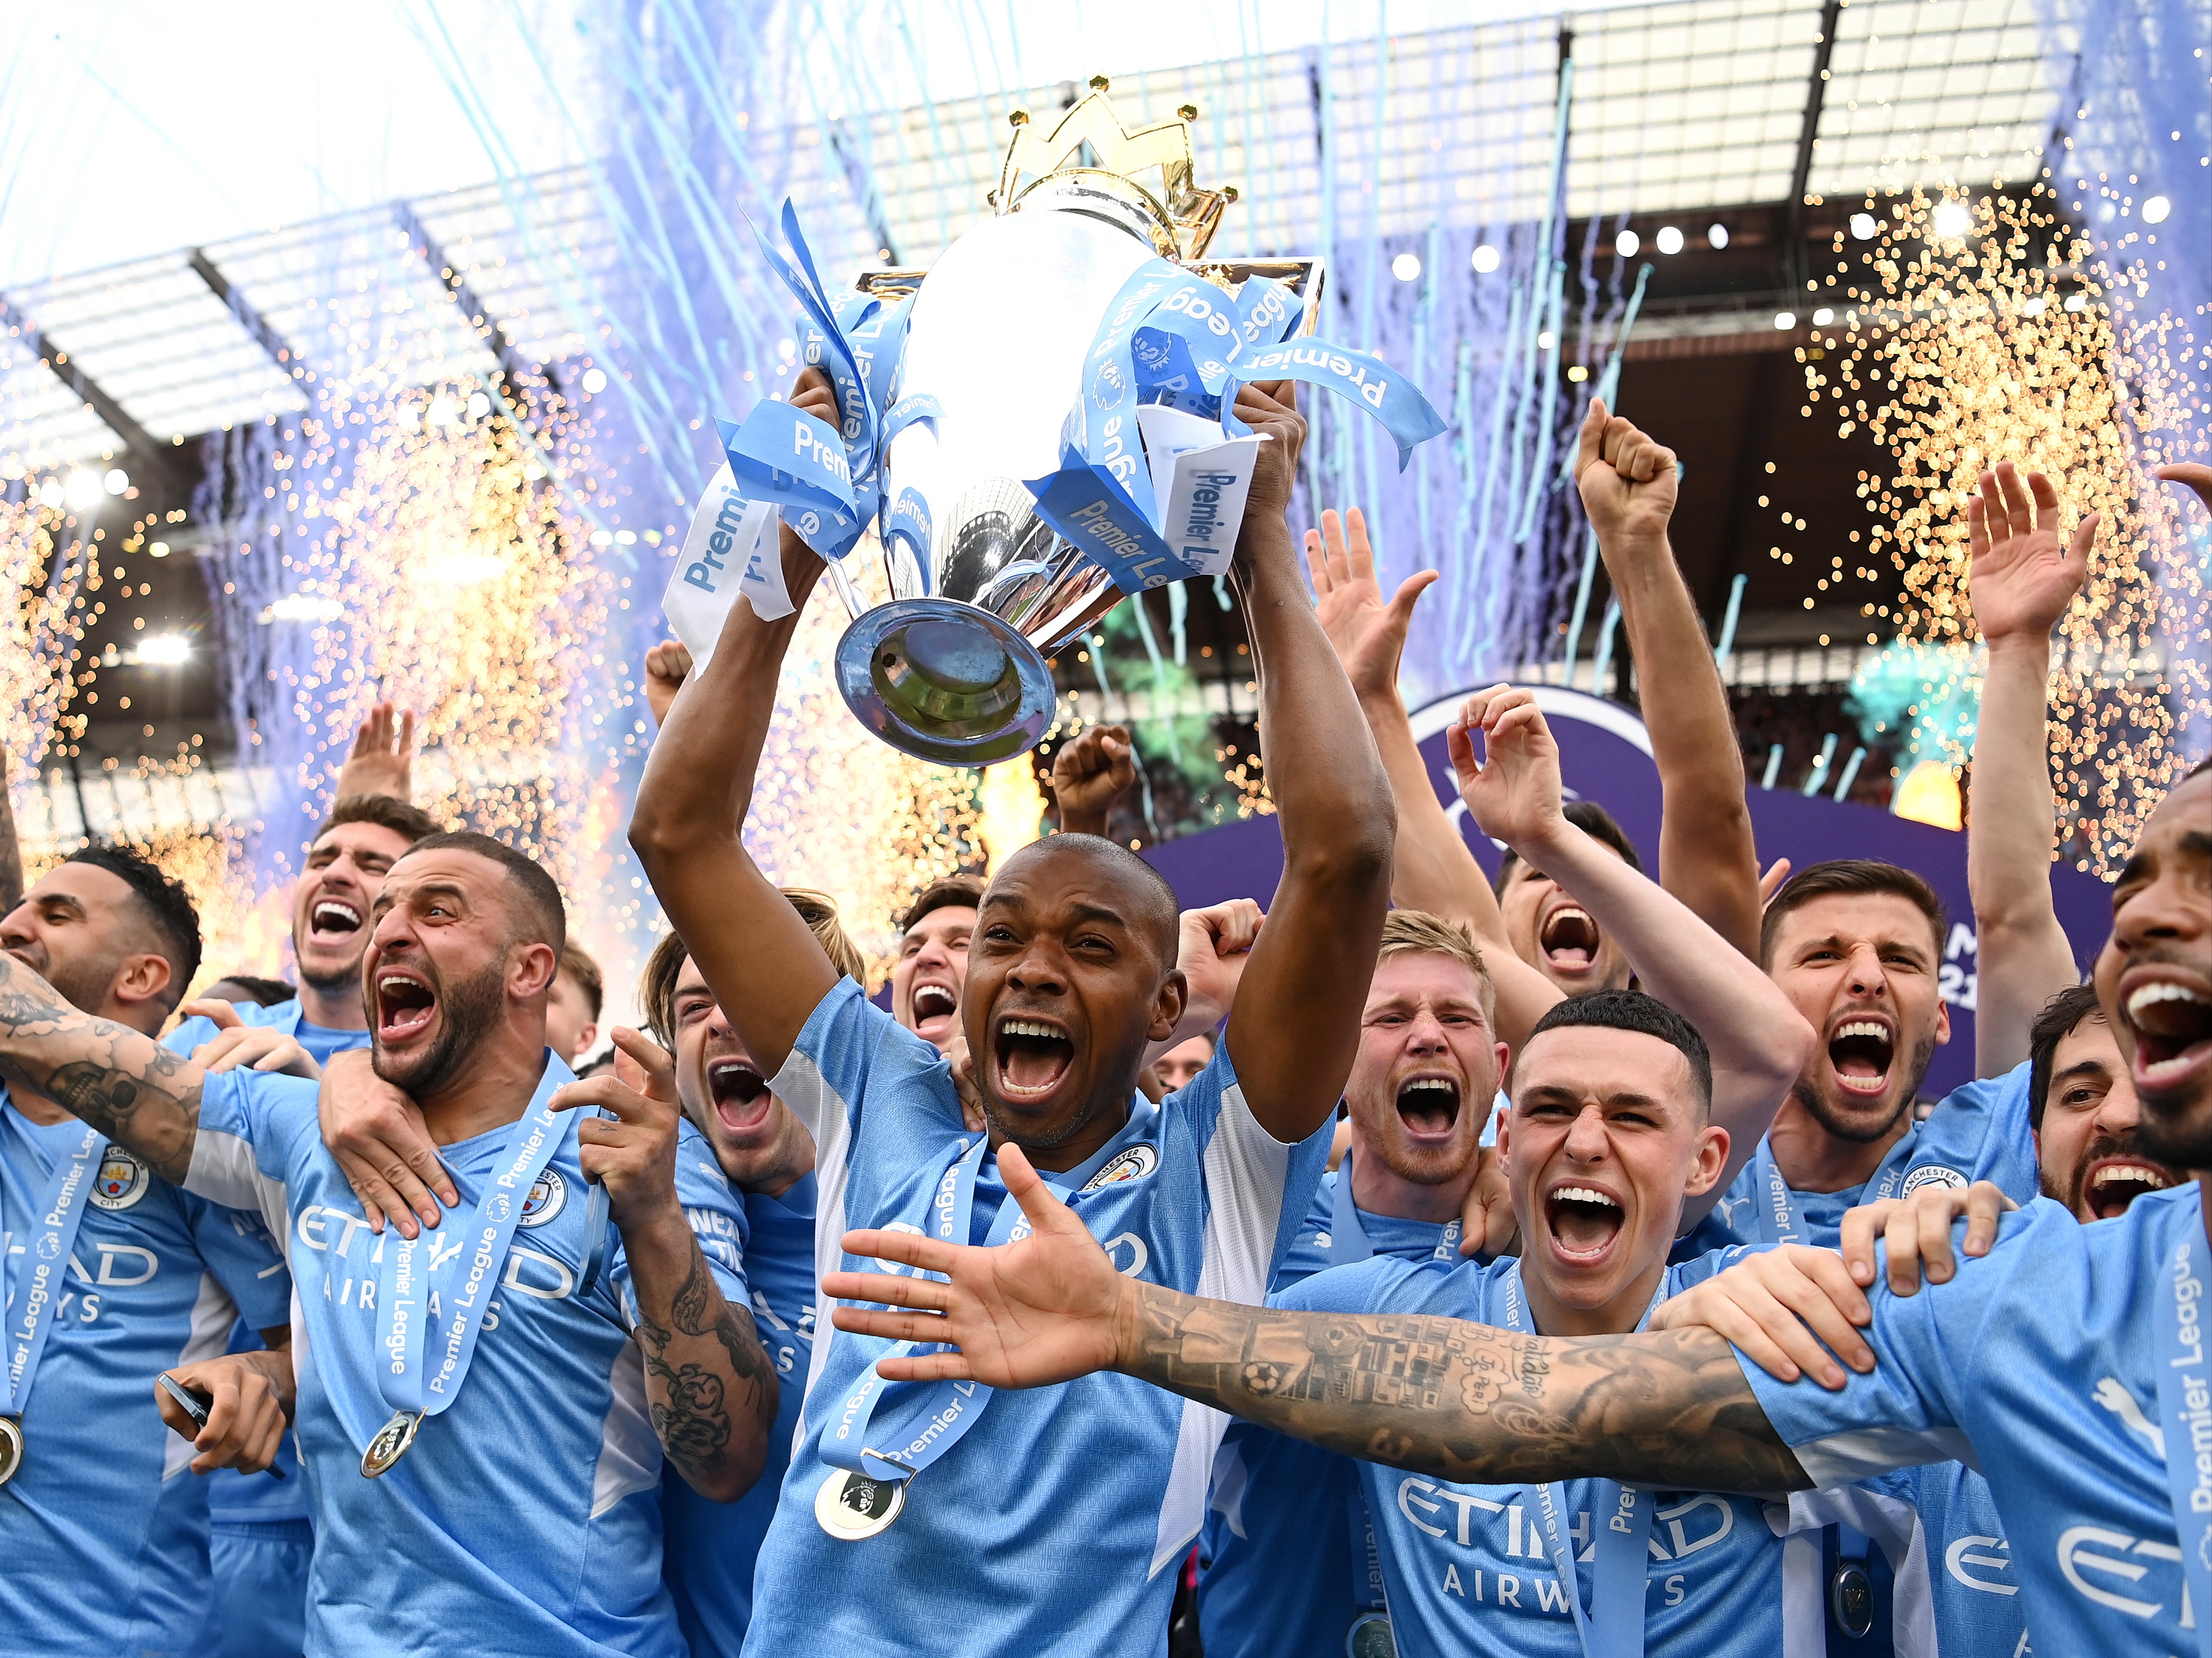 Manchester City produced a stunning scoring spree to seal the Premier League title